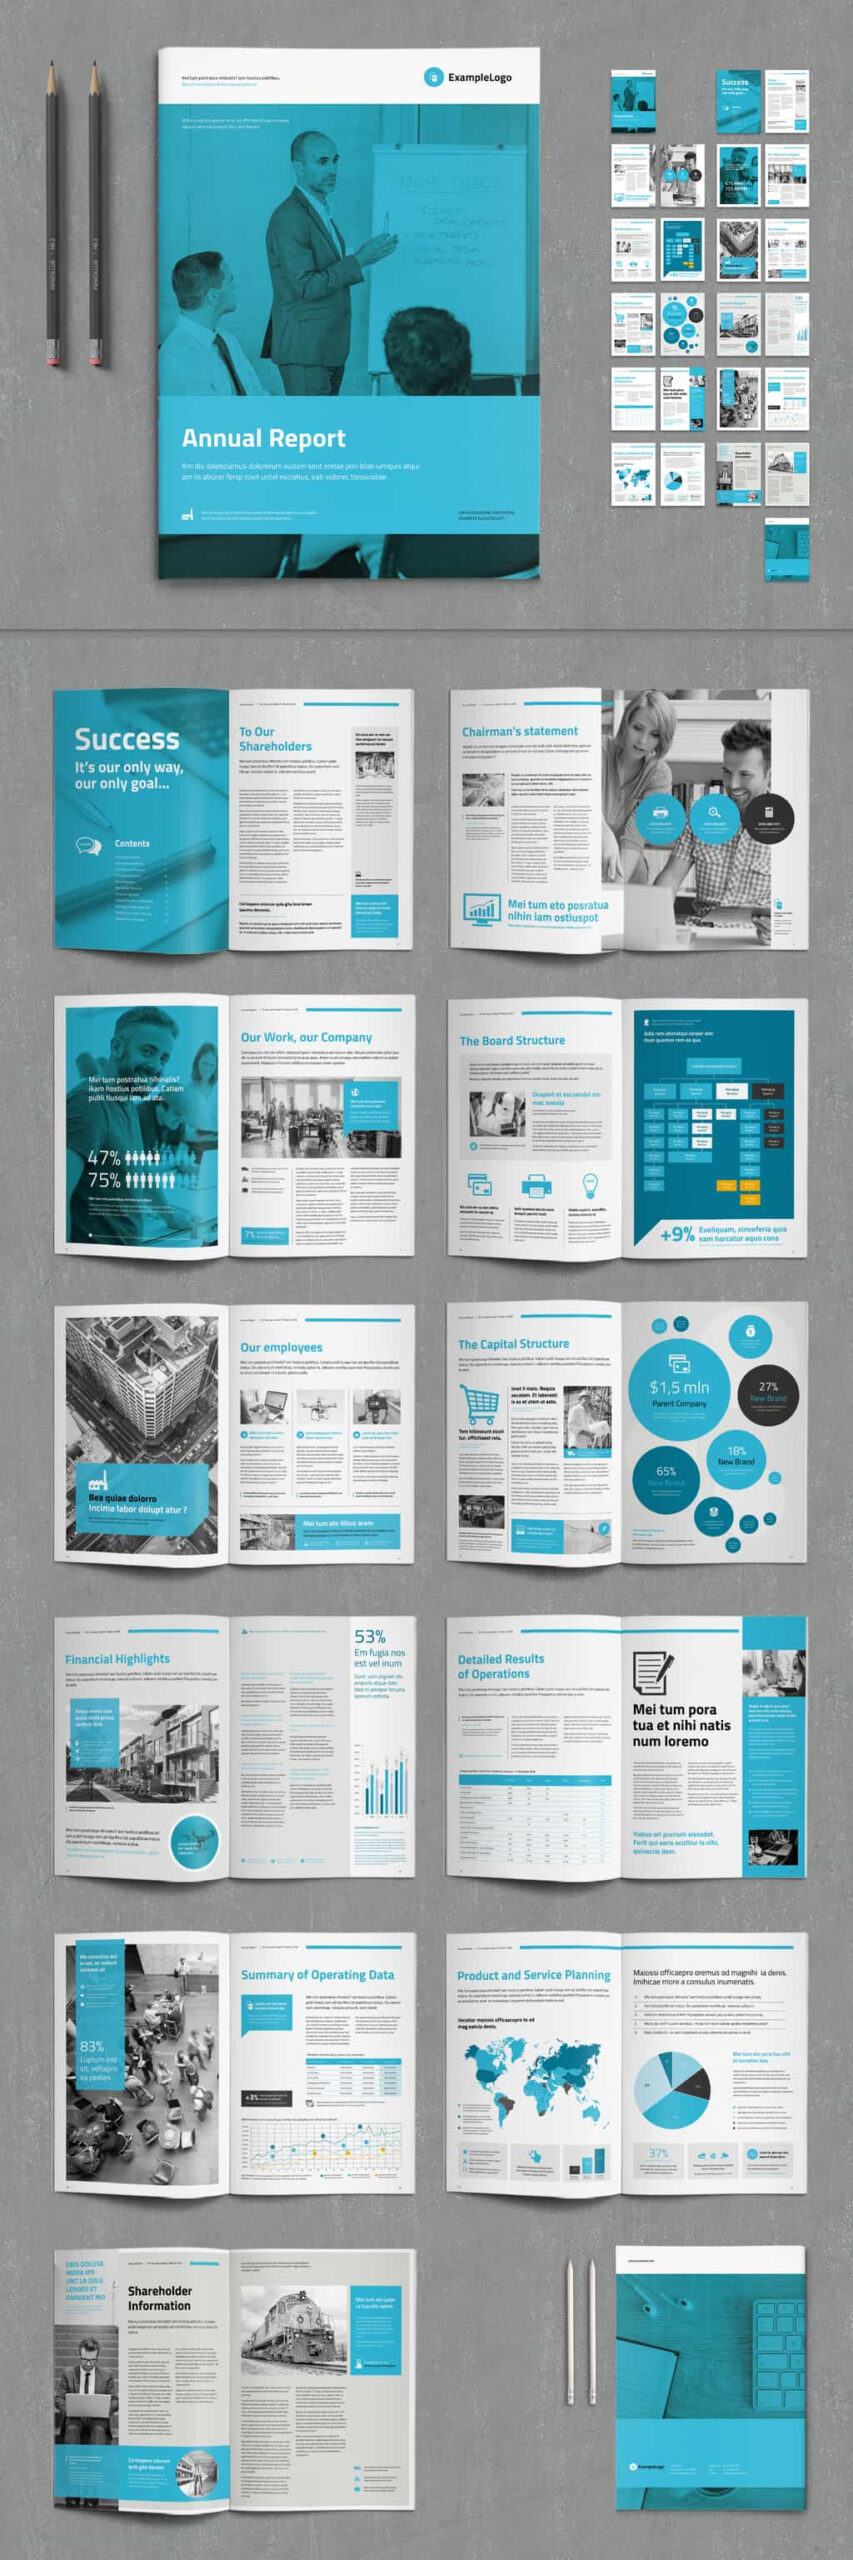 10 Modern Annual Report Design Templates [Free and Paid]  Redokun  In Summary Annual Report Template